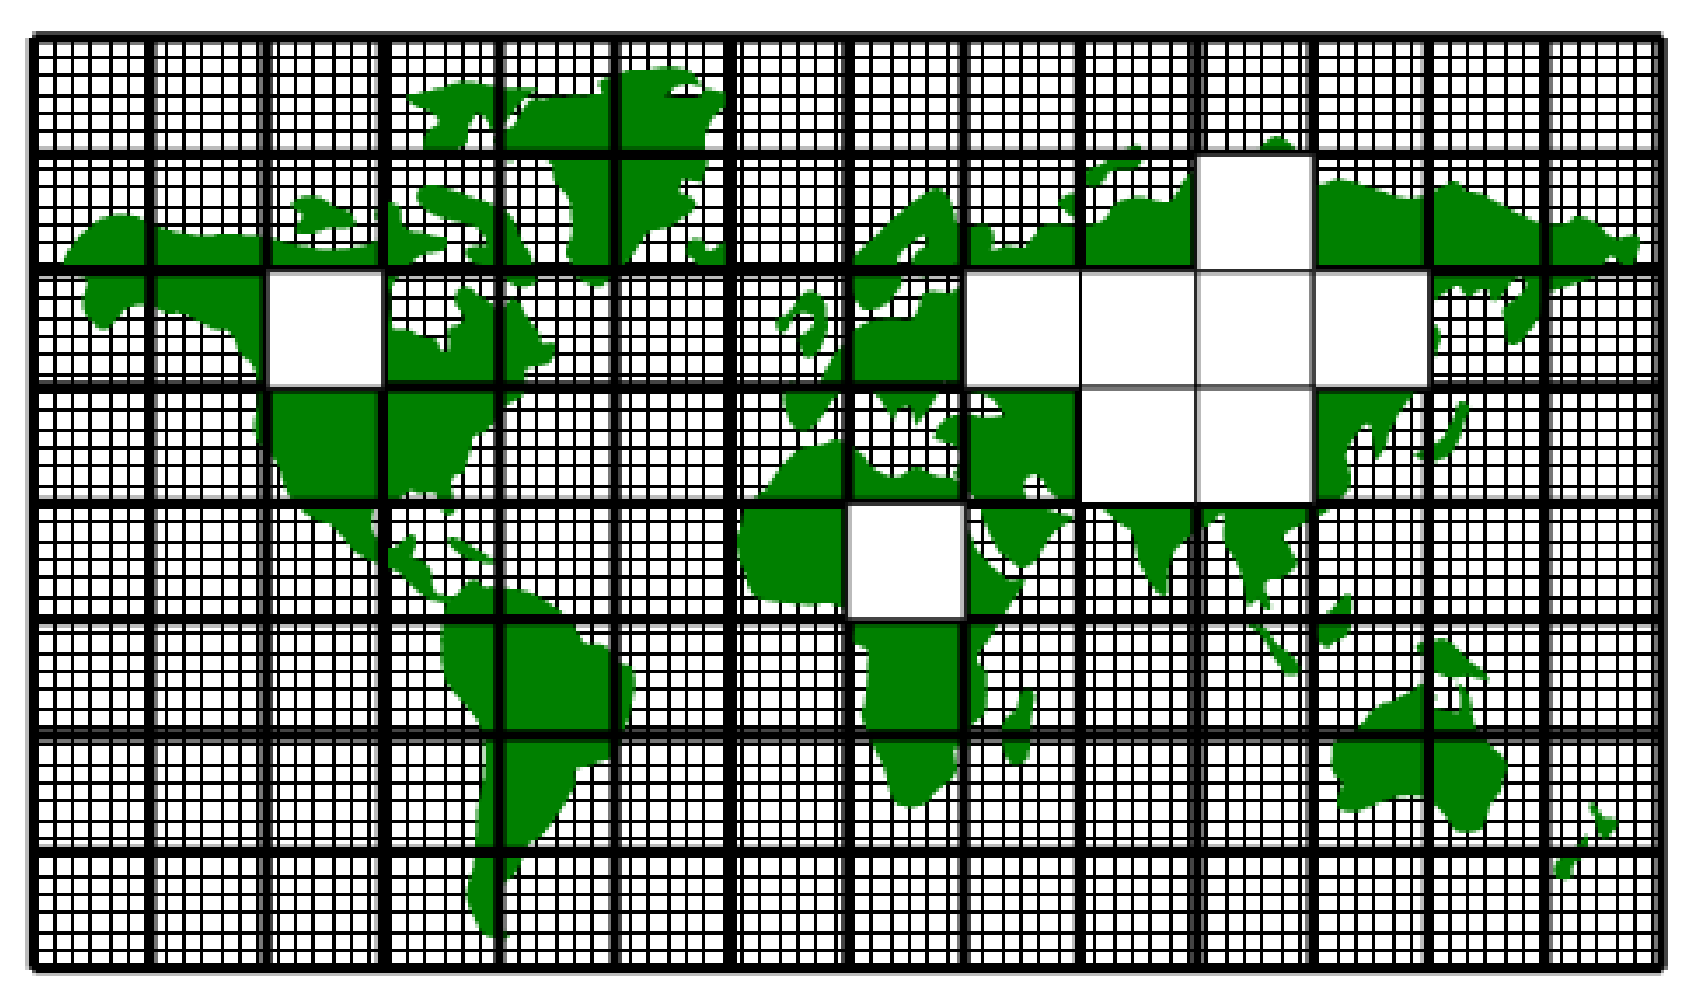 global earth subdivided into tiles